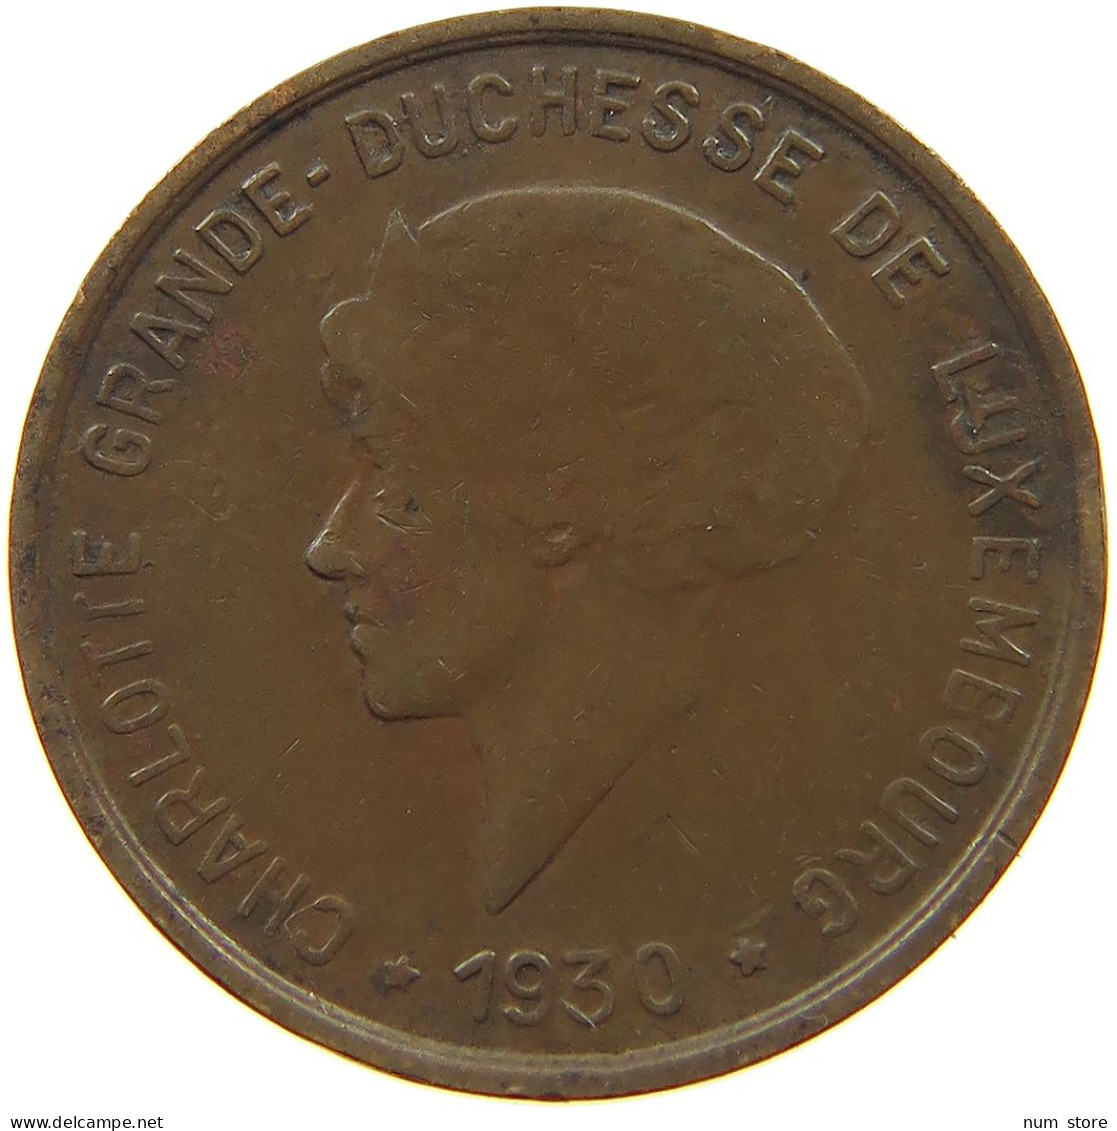 LUXEMBOURG 5 CENTIMES 1930 #a014 0227 - Luxembourg